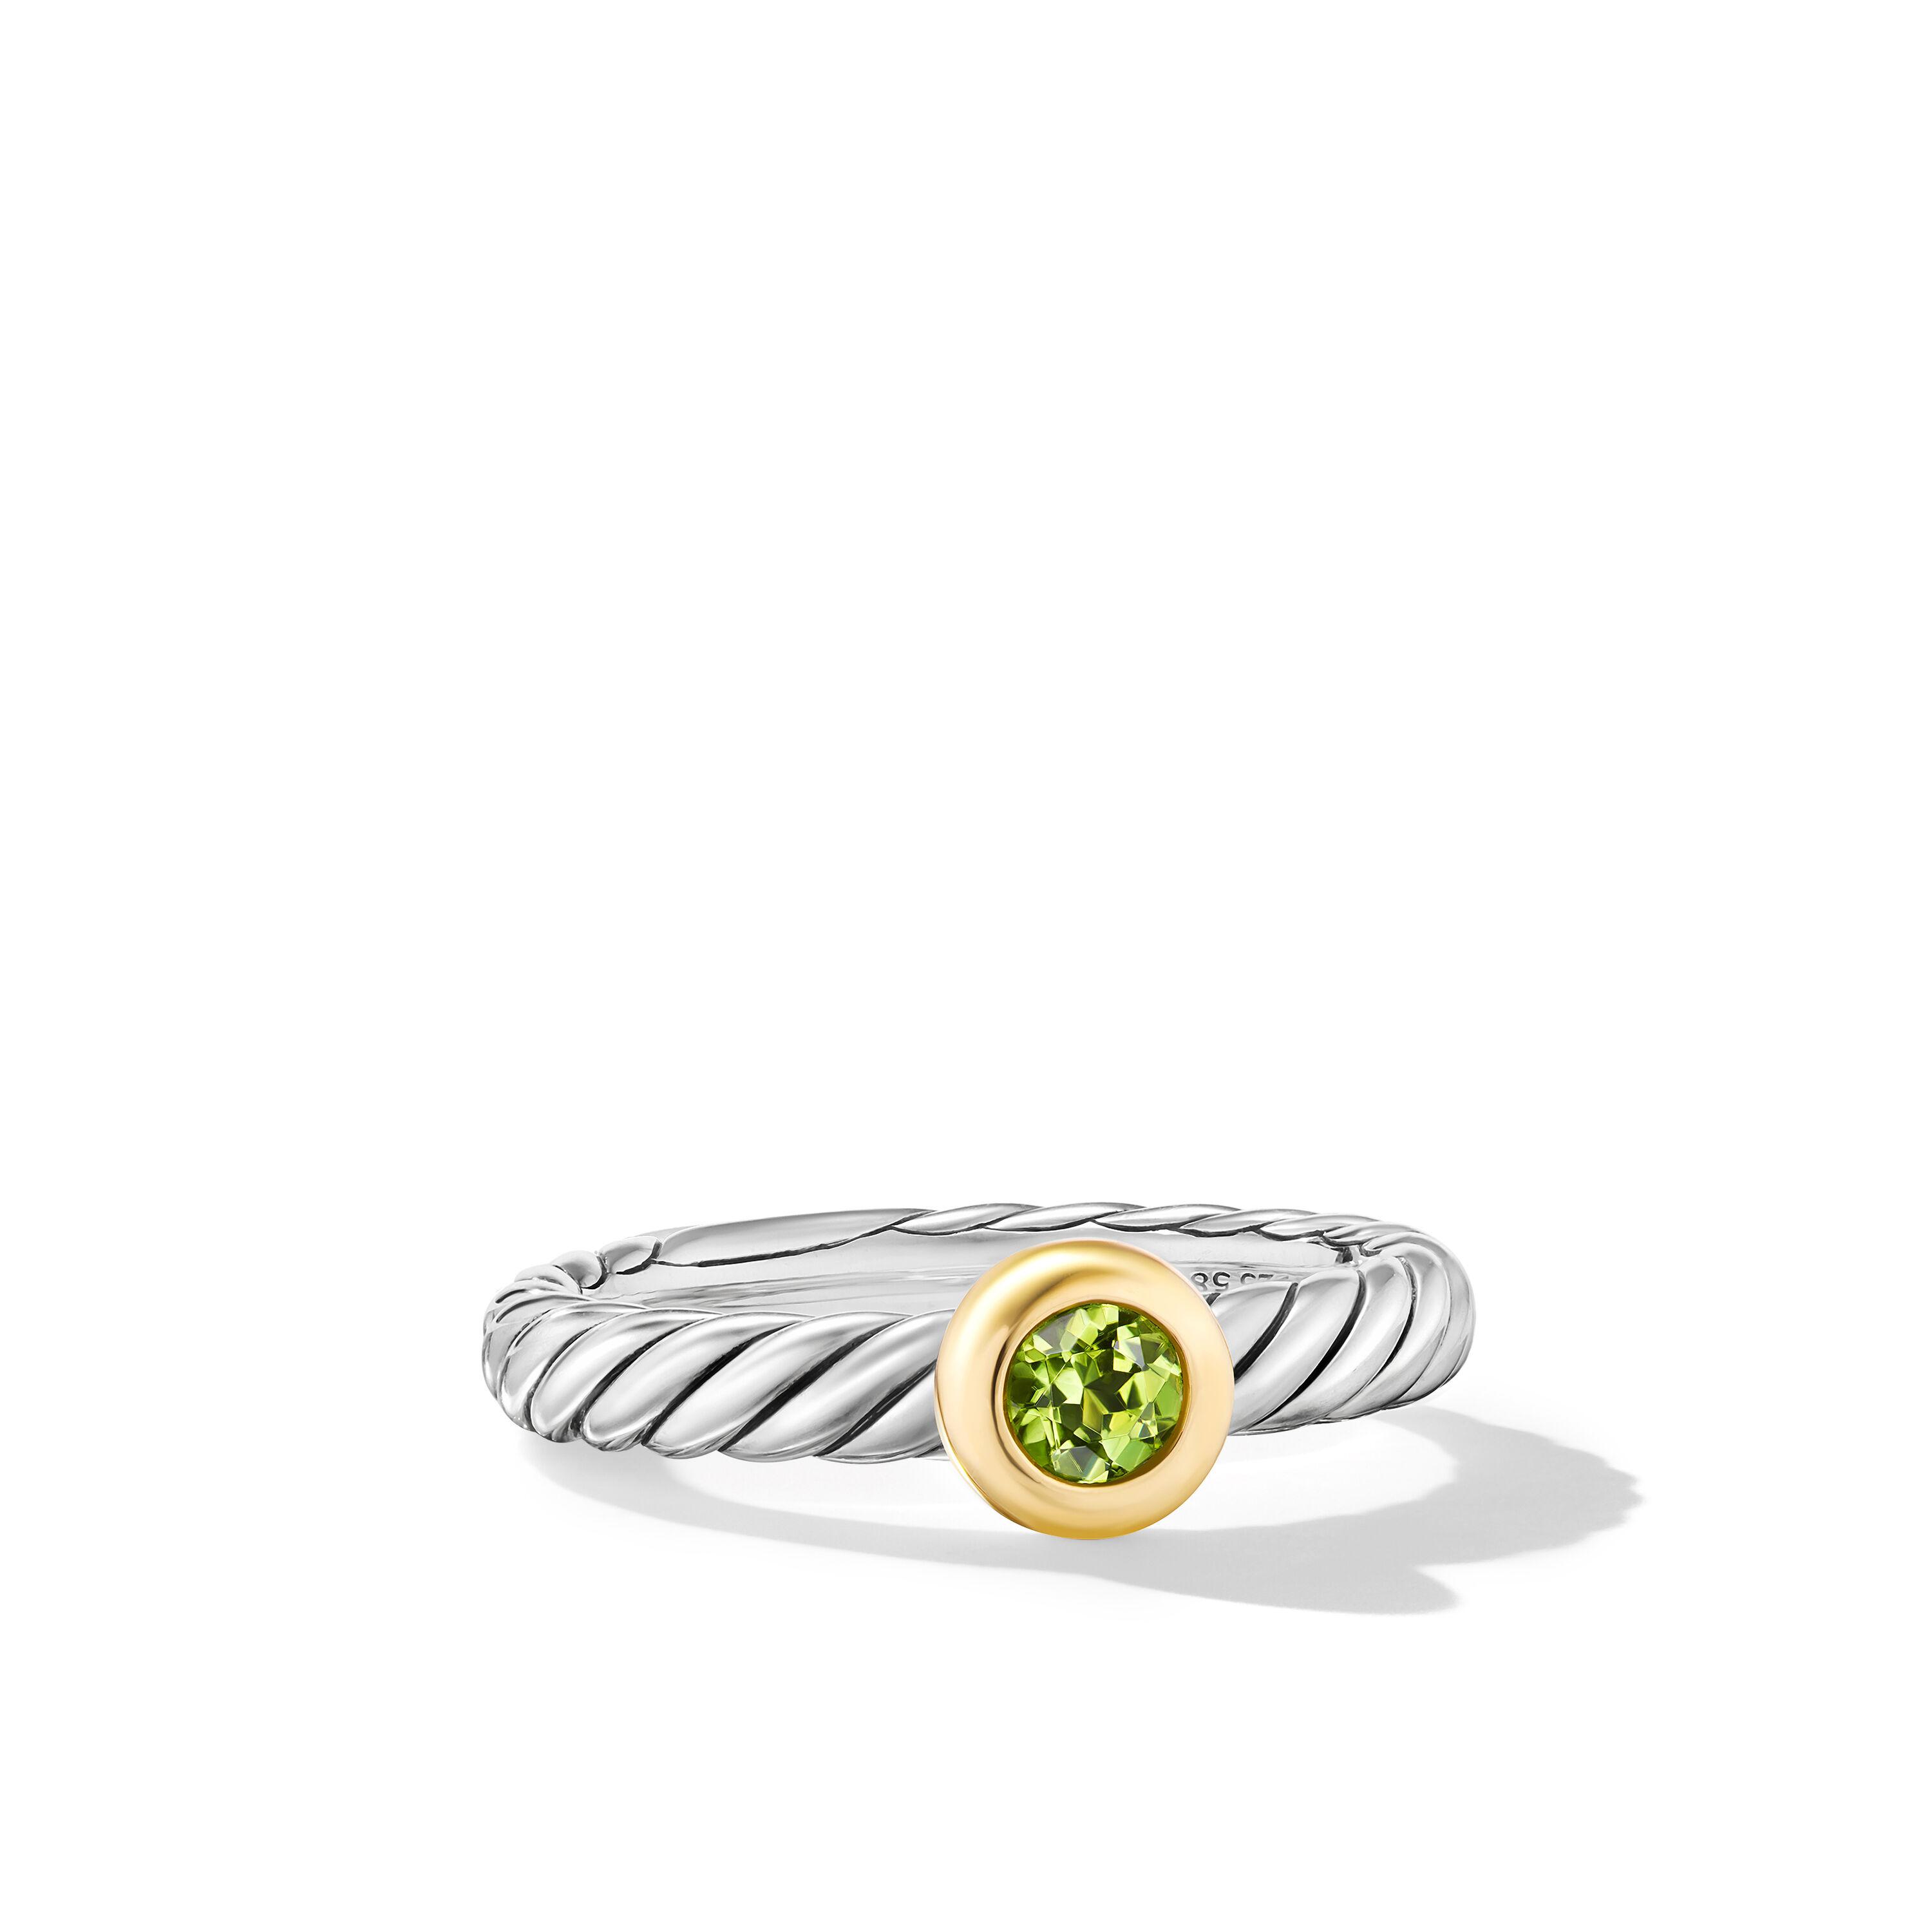 David Yurman Petite Cable Ring in Sterling Silver with 14K Yellow Gold and Peridot, Size 7 0